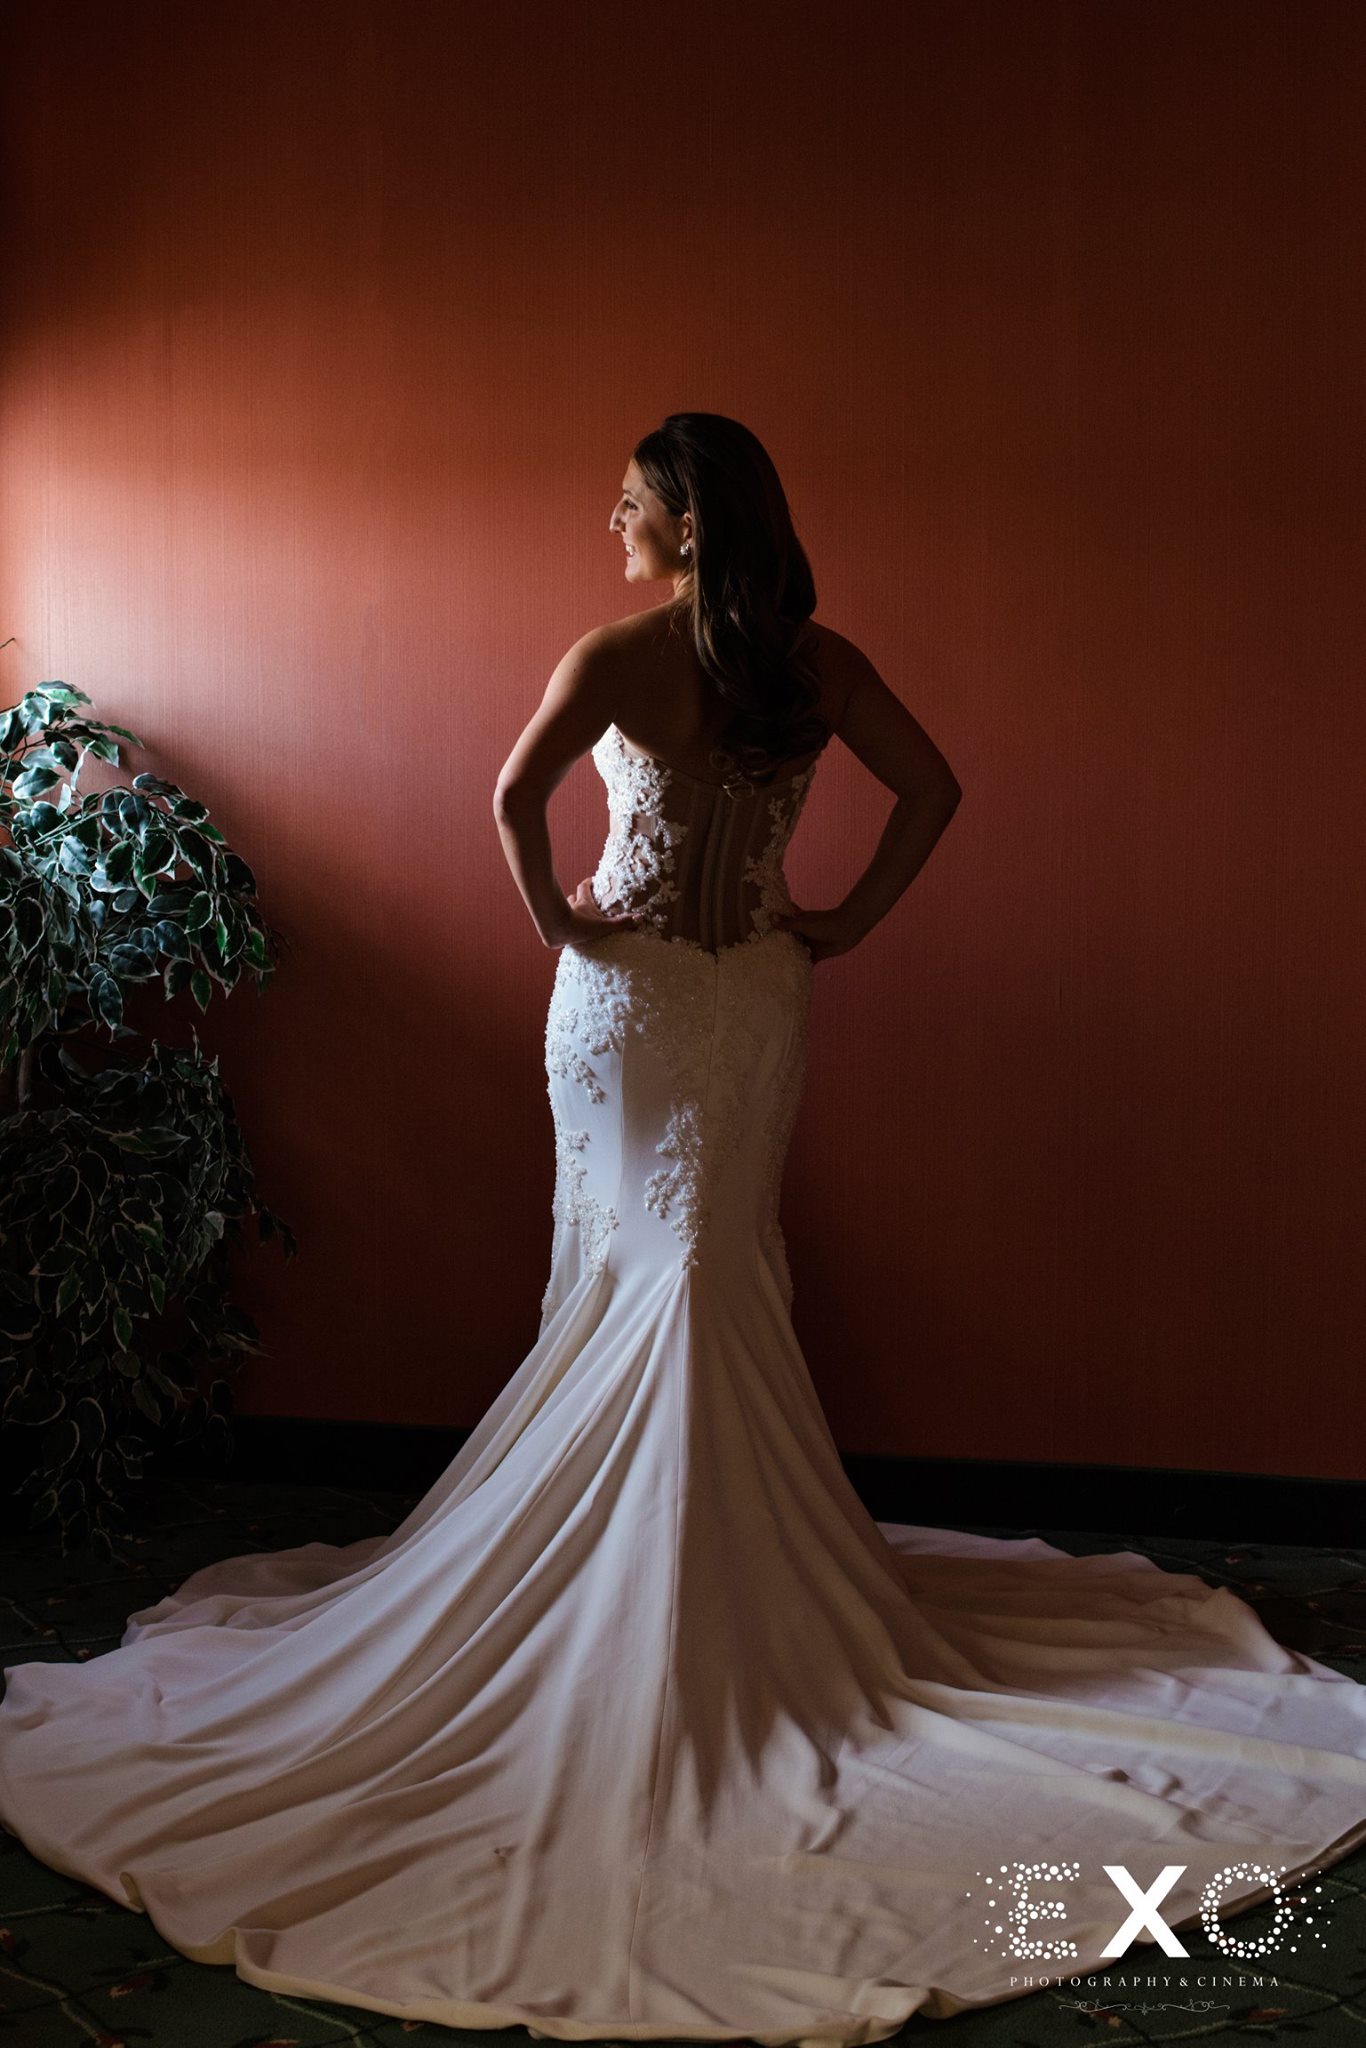 dramatic photo of bride posing in bridal gown